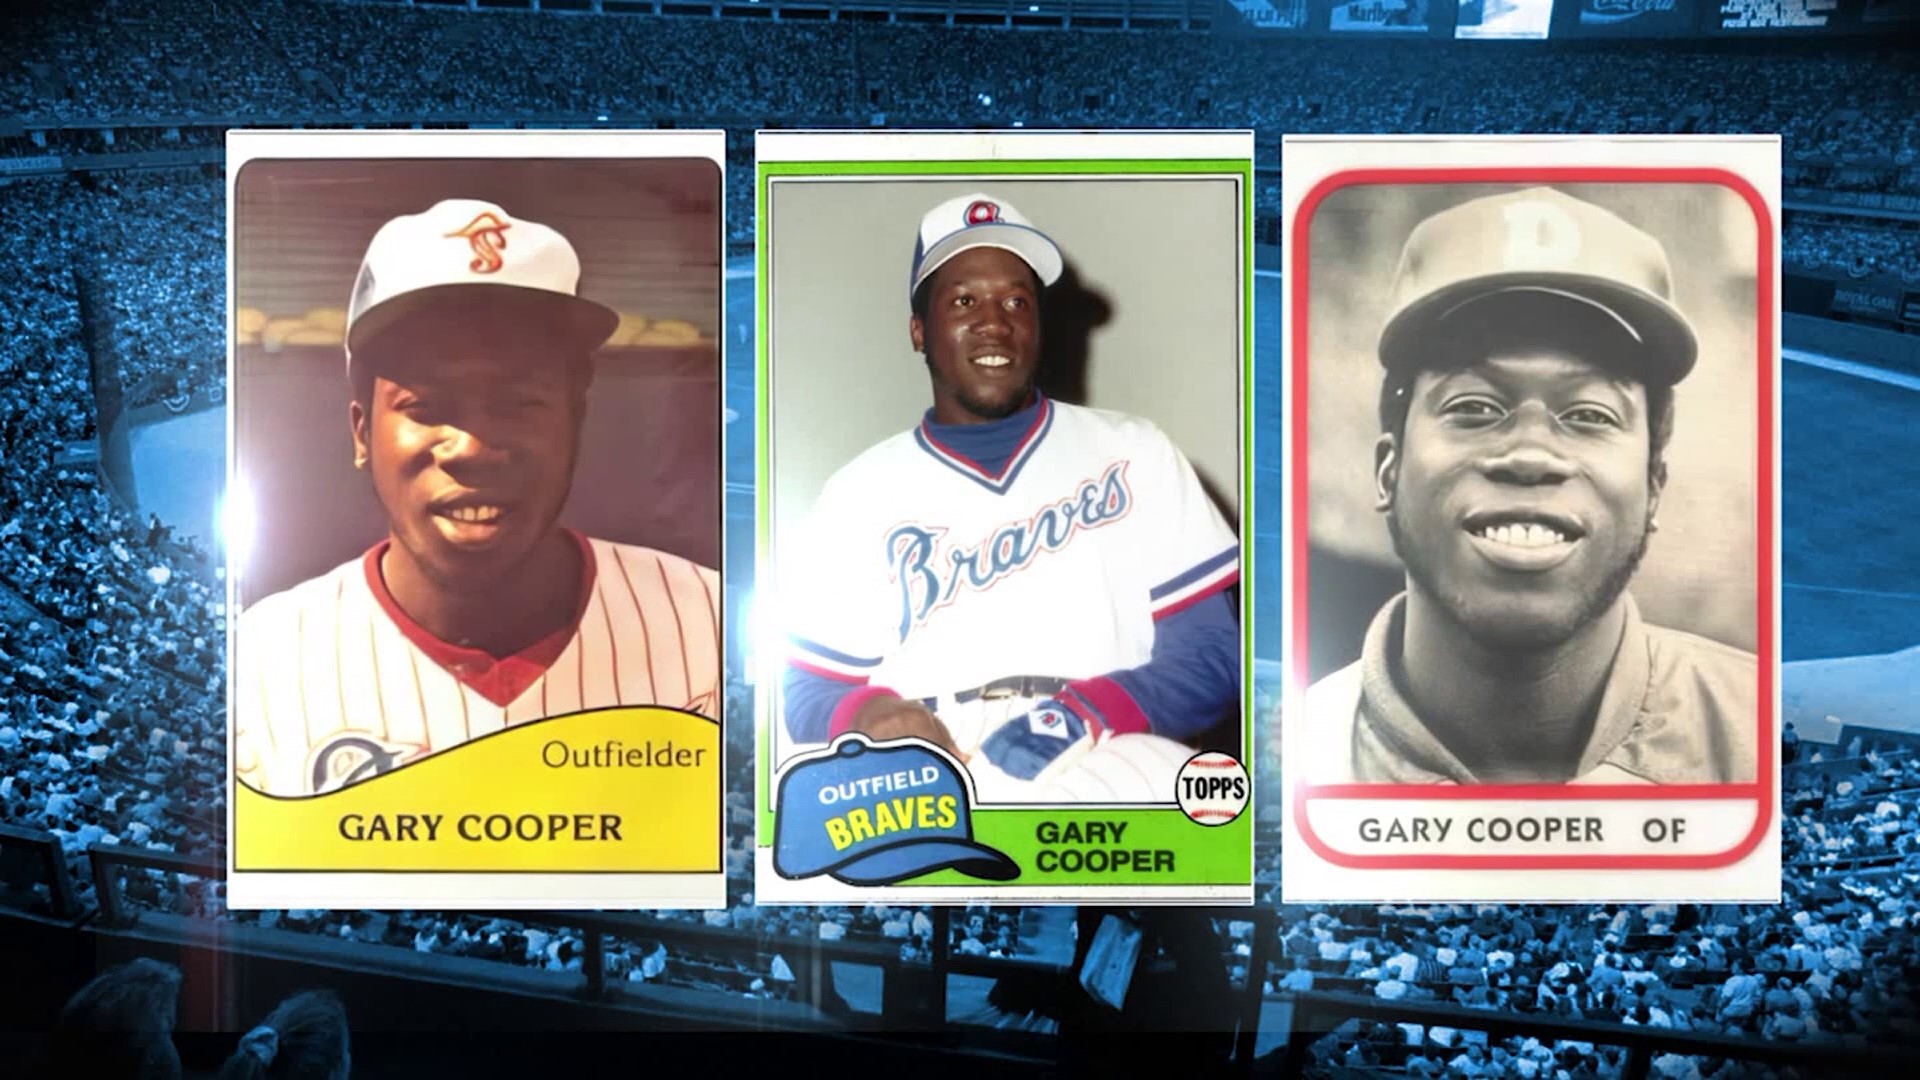 Gary Cooper, a former Atlanta Braves outfielder, missed out on a mandatory MLB pension by just one day.